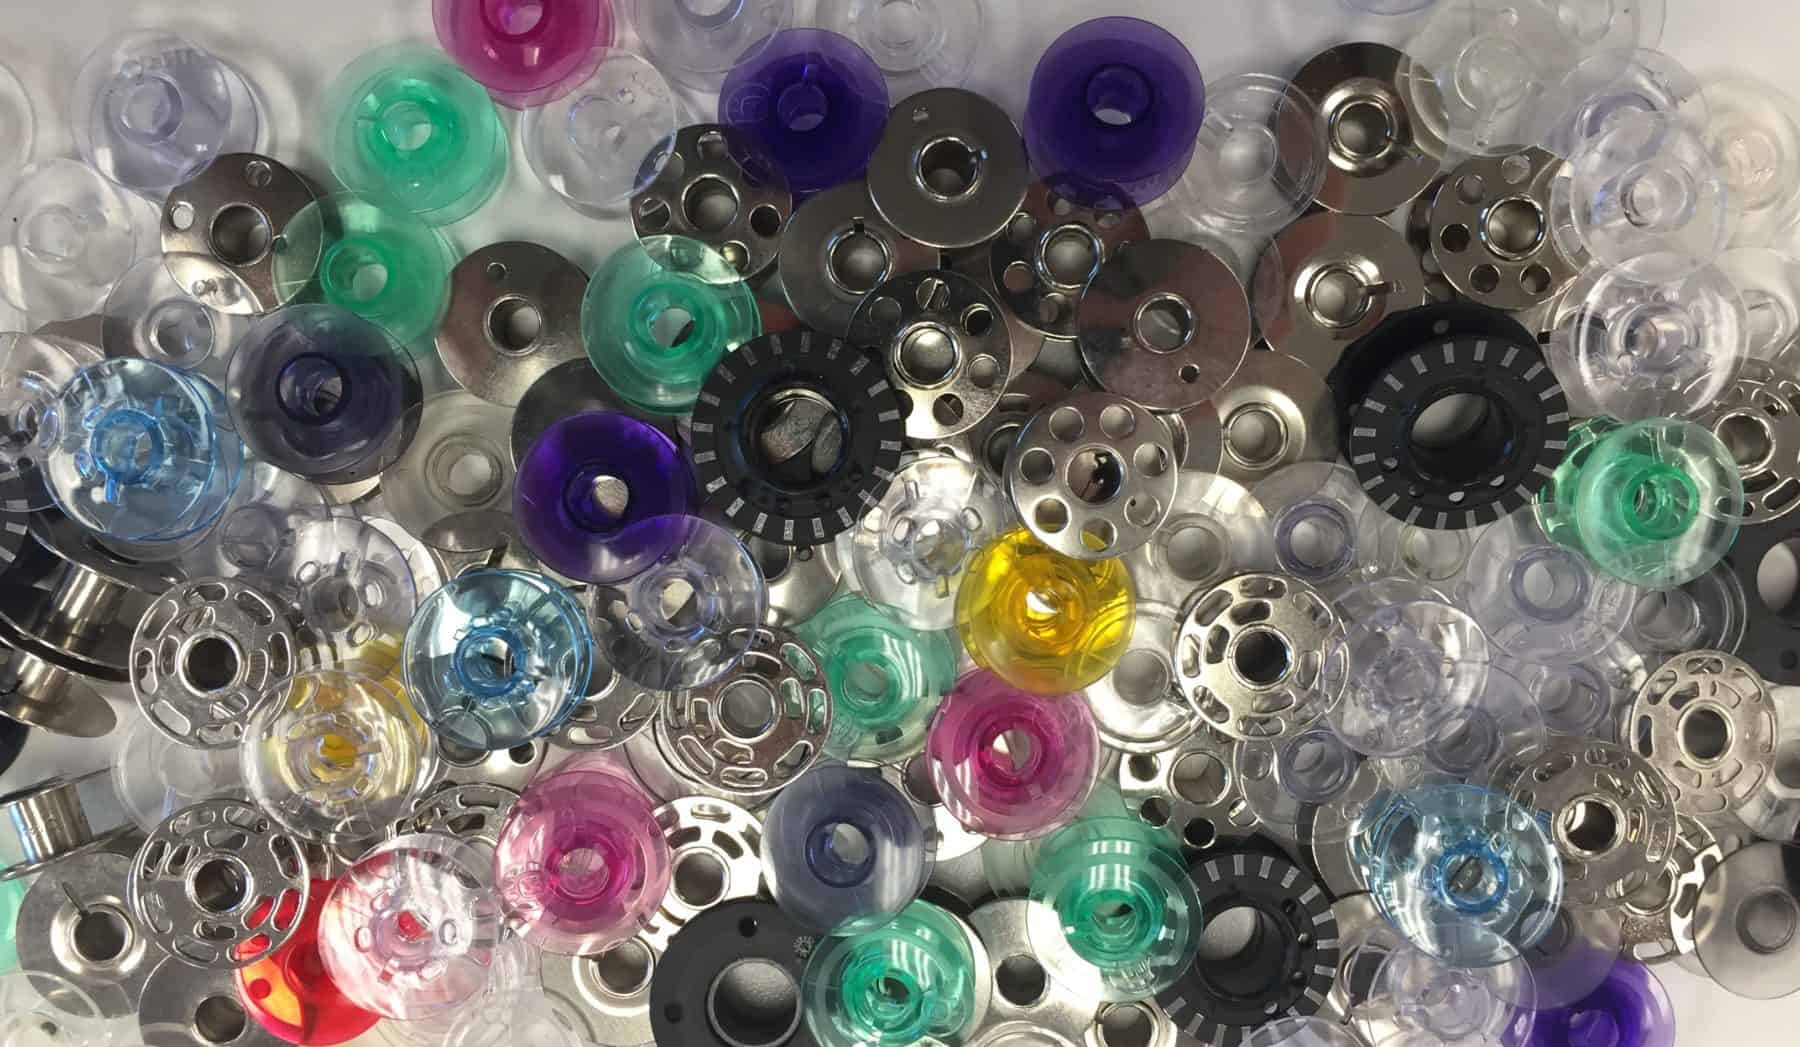 Class L clear-plastic bobbins ideal for winding your own bobbins.